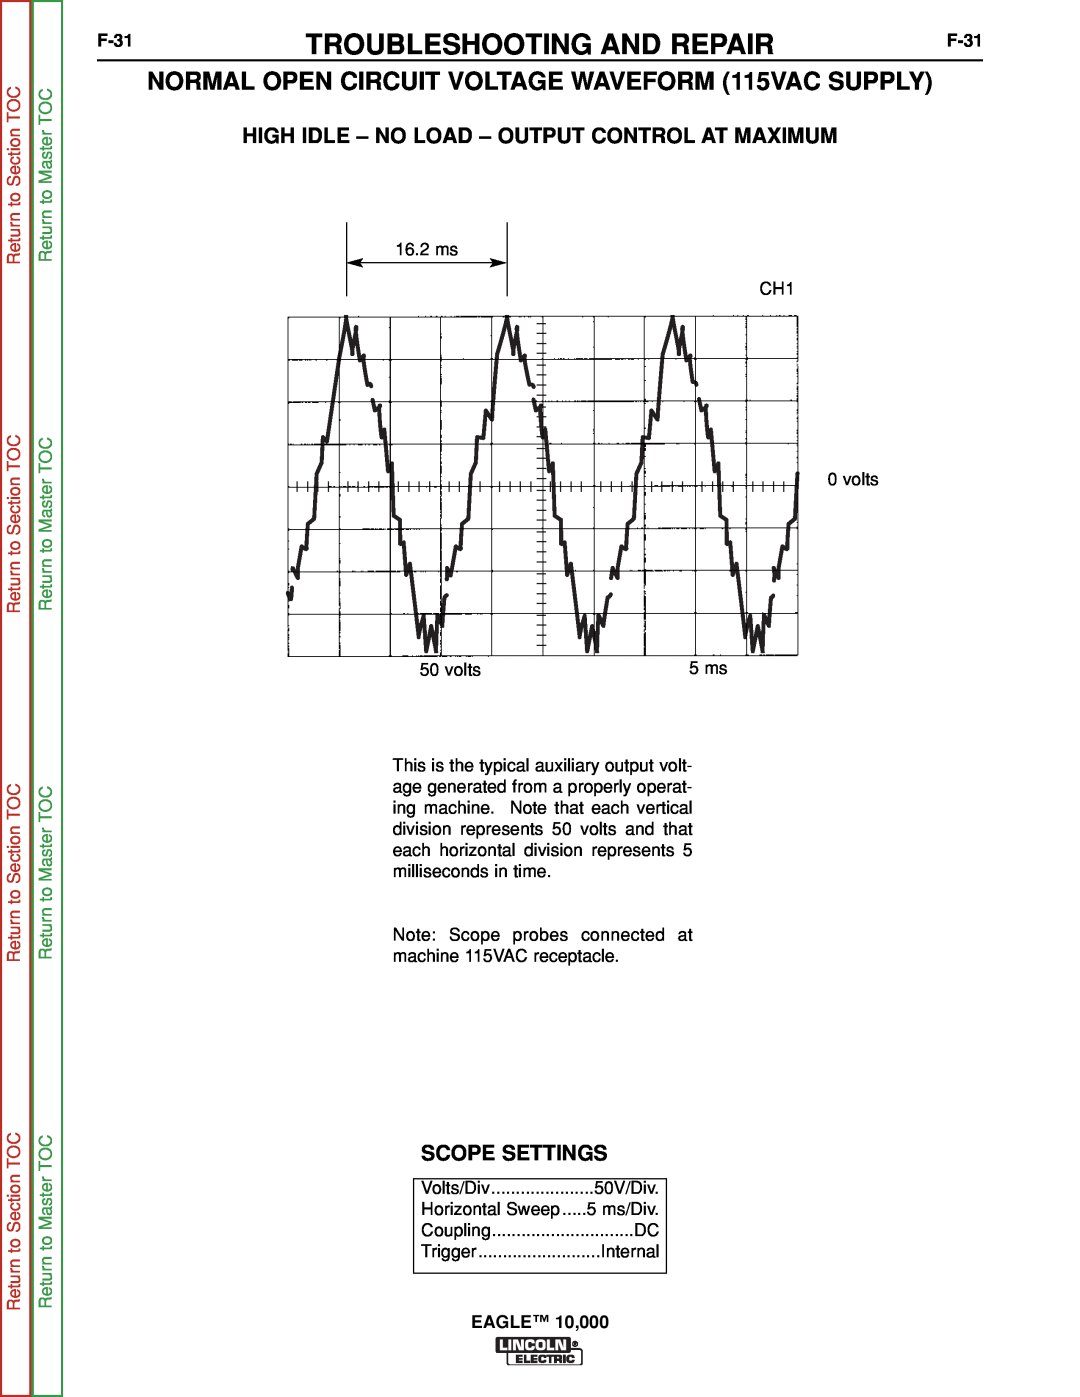 Lincoln Electric SVM192-A NORMAL OPEN CIRCUIT VOLTAGE WAVEFORM 115VAC SUPPLY, Scope Settings, F-31, Return to Section TOC 